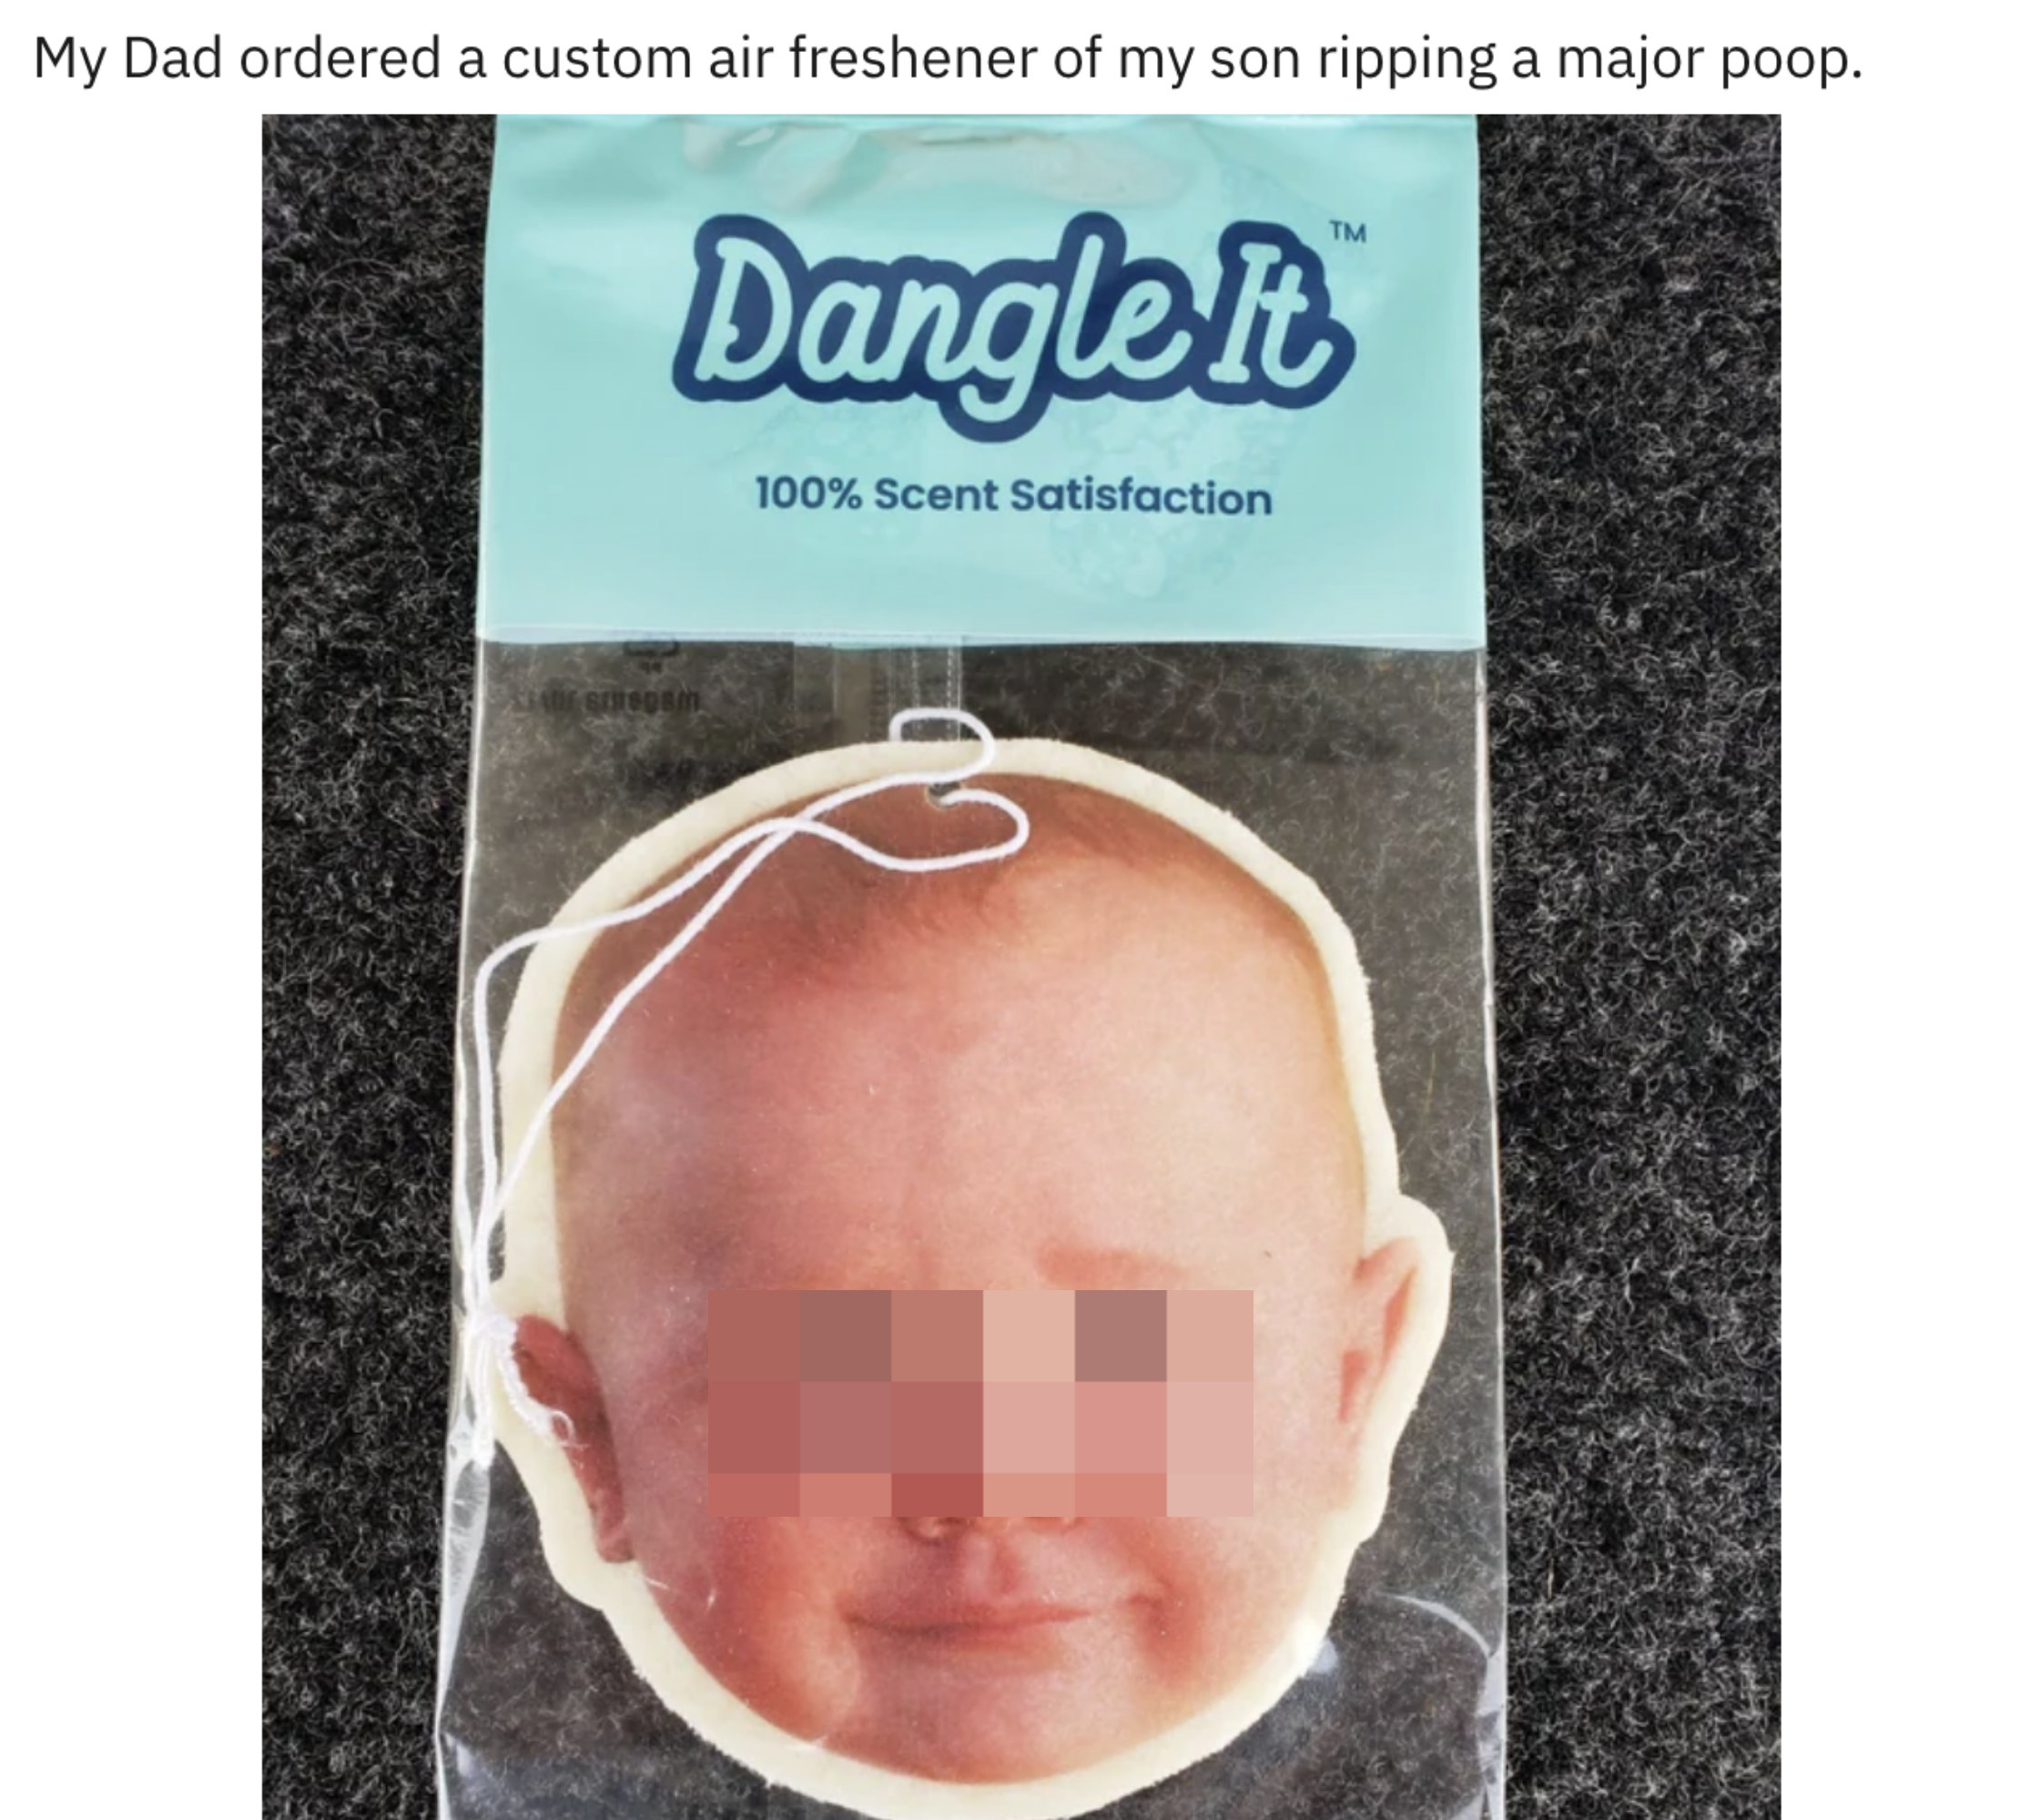 car freshener of a baby&#x27;s face when he makes a poop